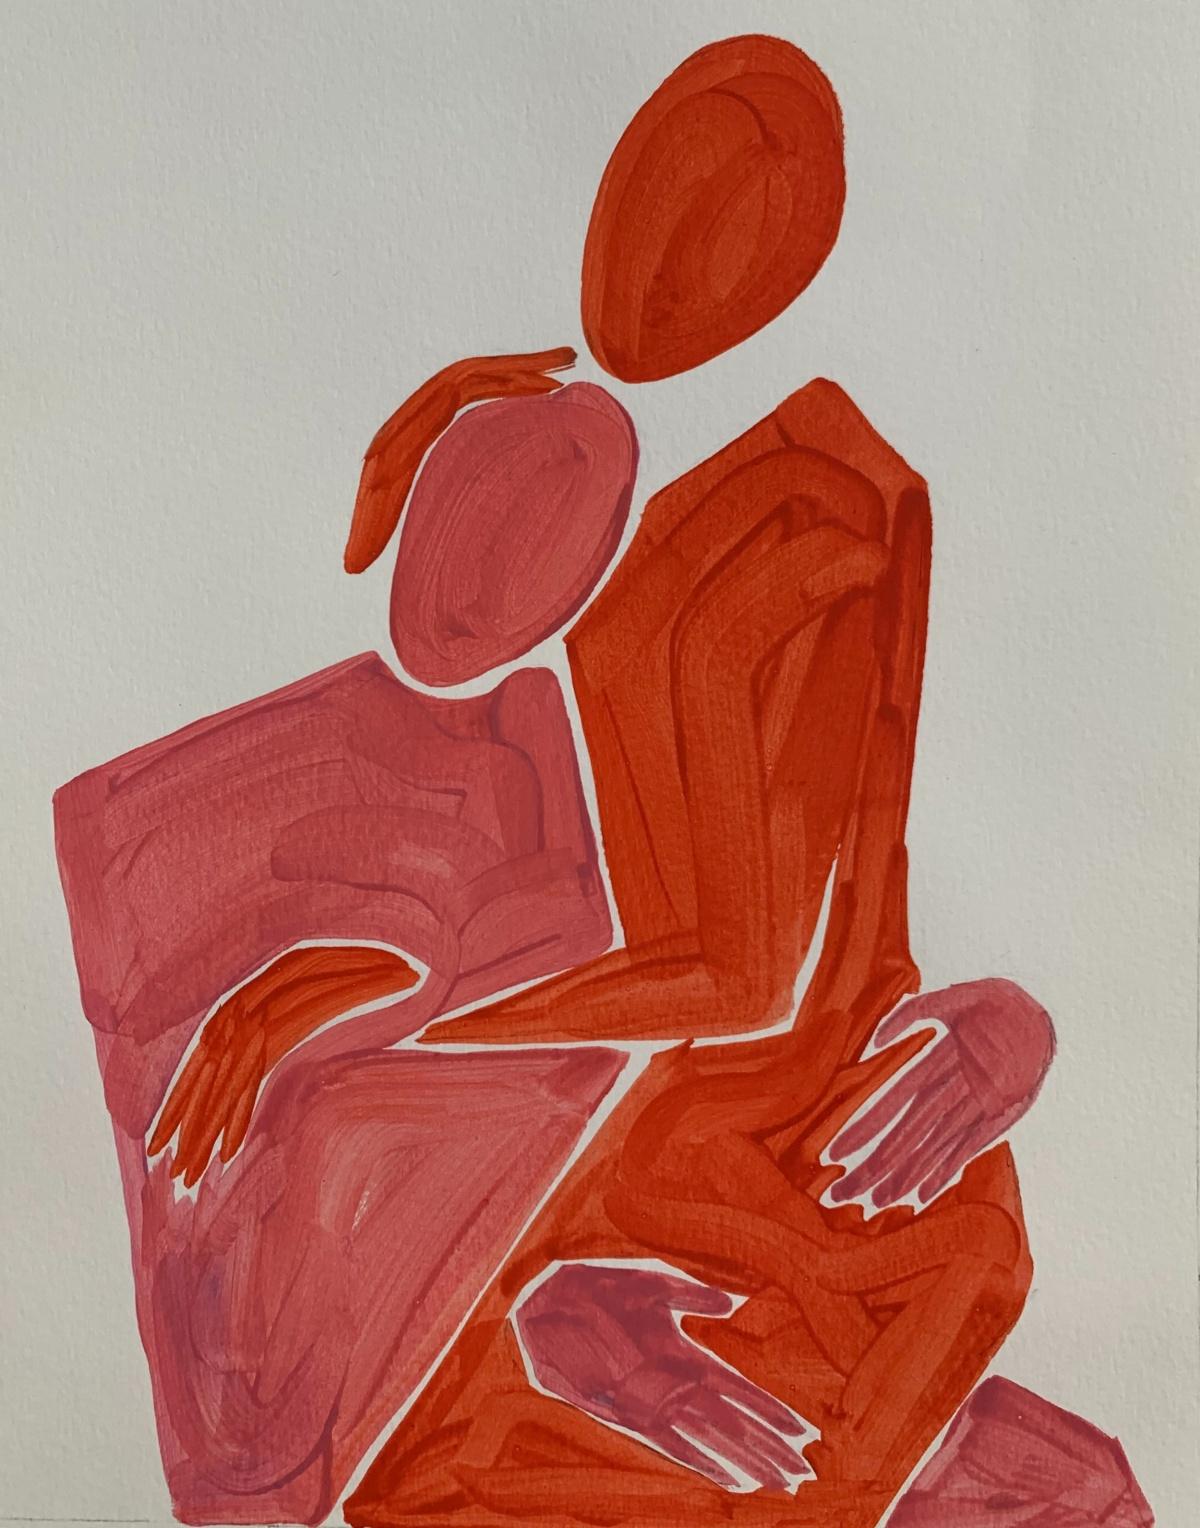 Waleria Matelska Abstract Painting - Figures in embrace - Figurative Painting on Paper, Minimalist, Colorful, Vibrant